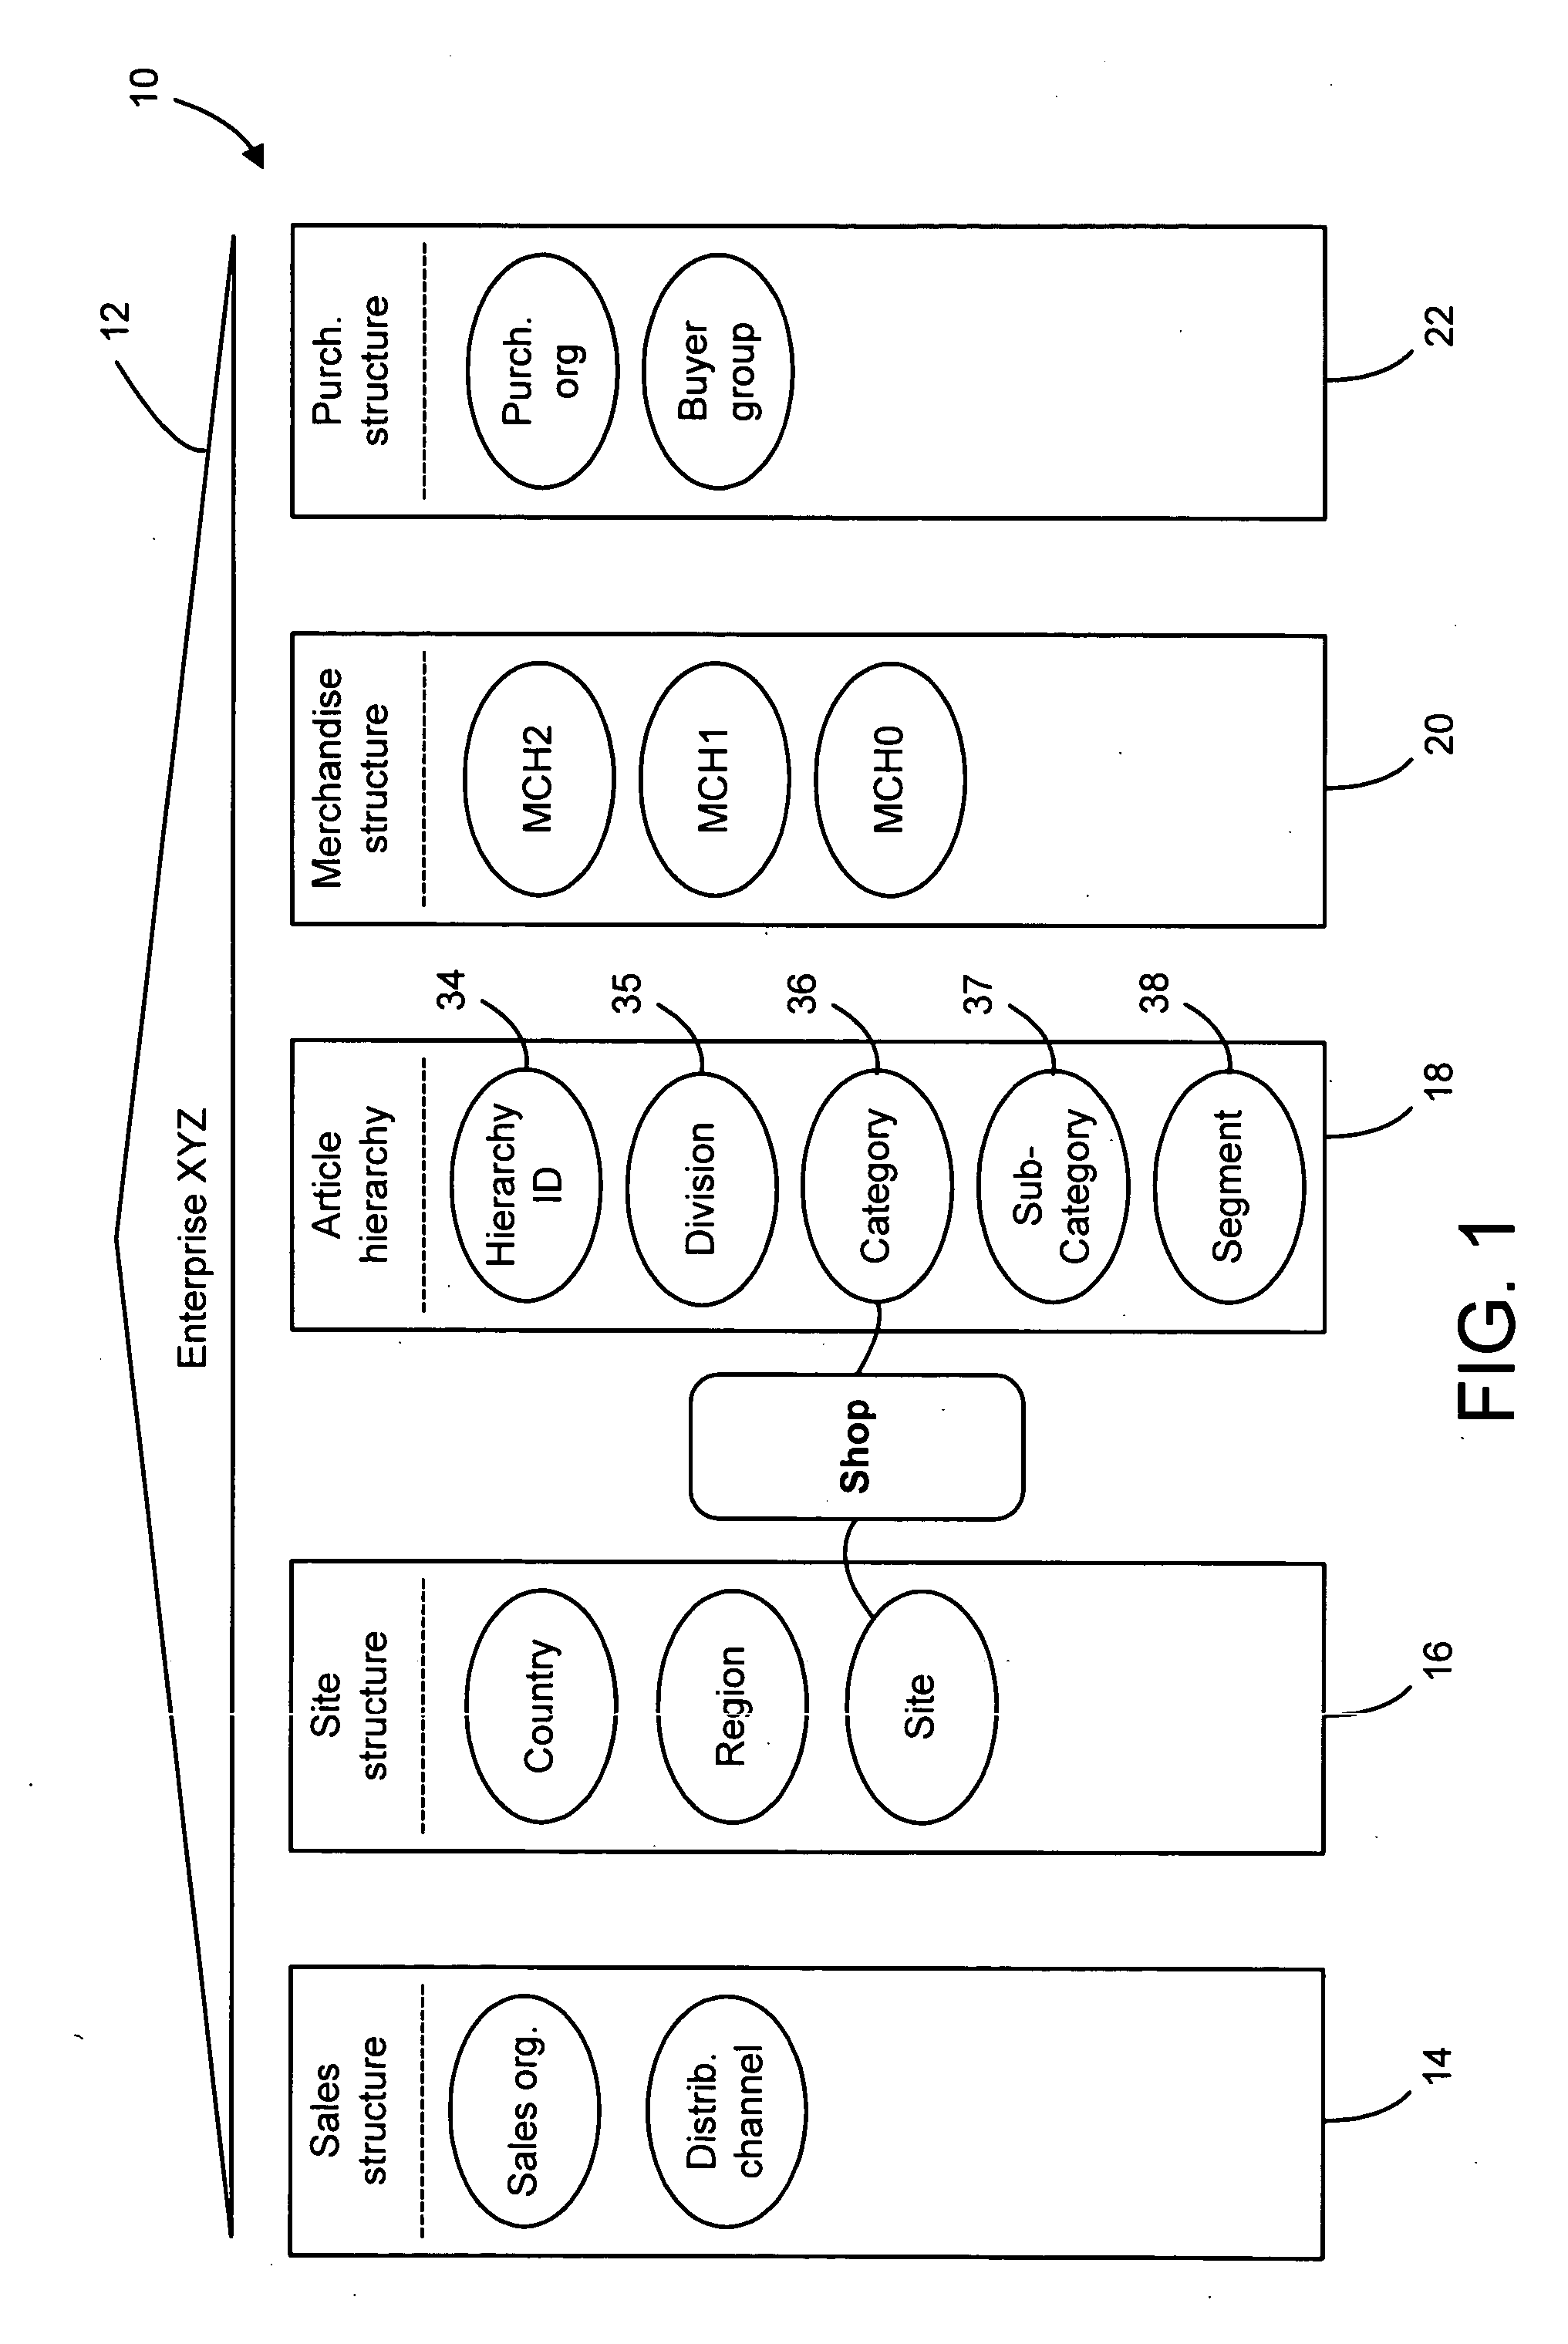 System and method for assortment planning